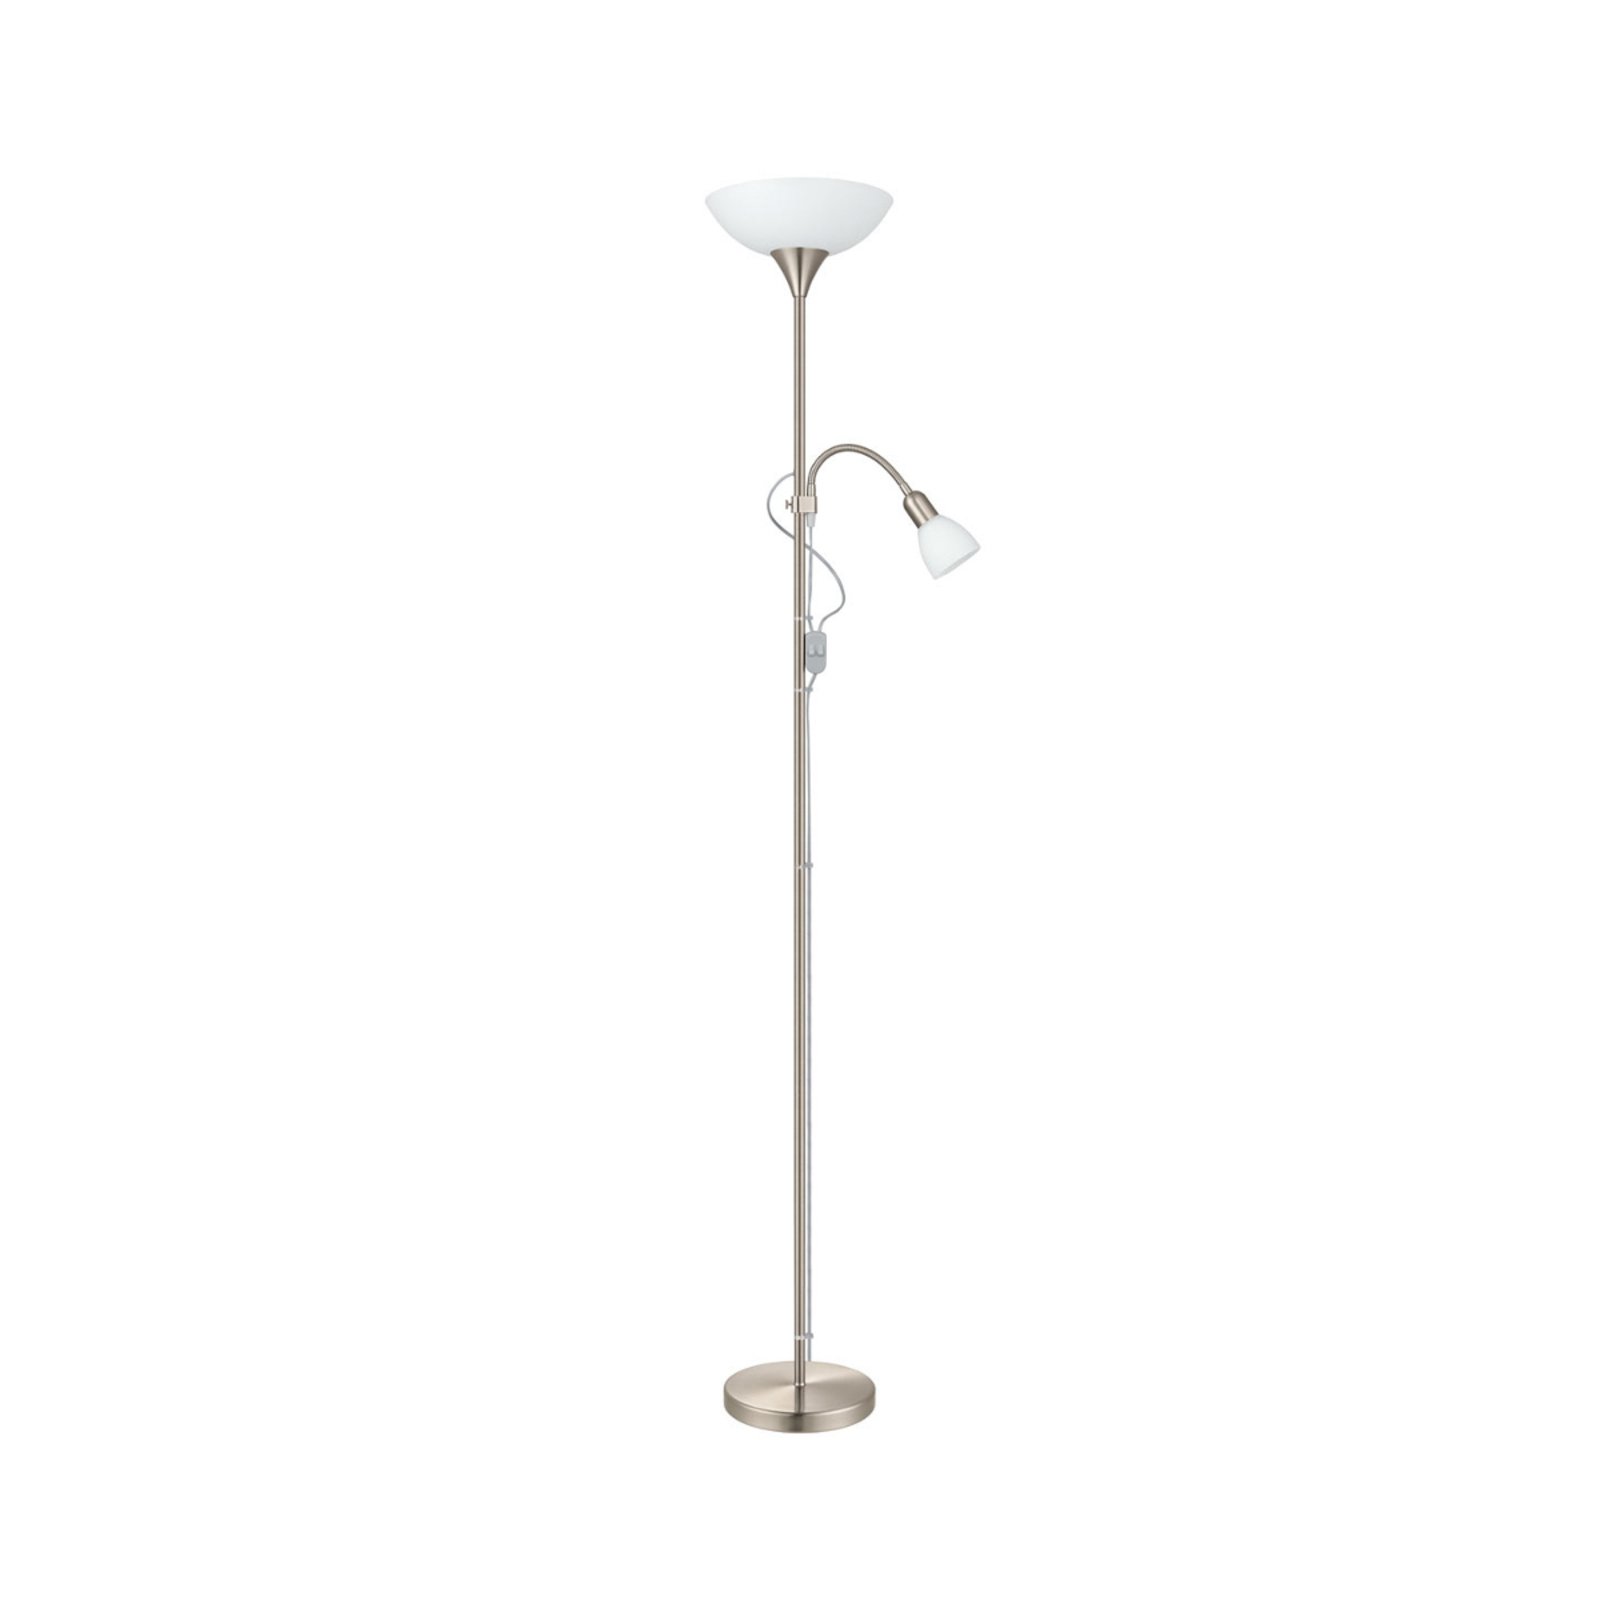 UP2 stable floor lamp with reading light